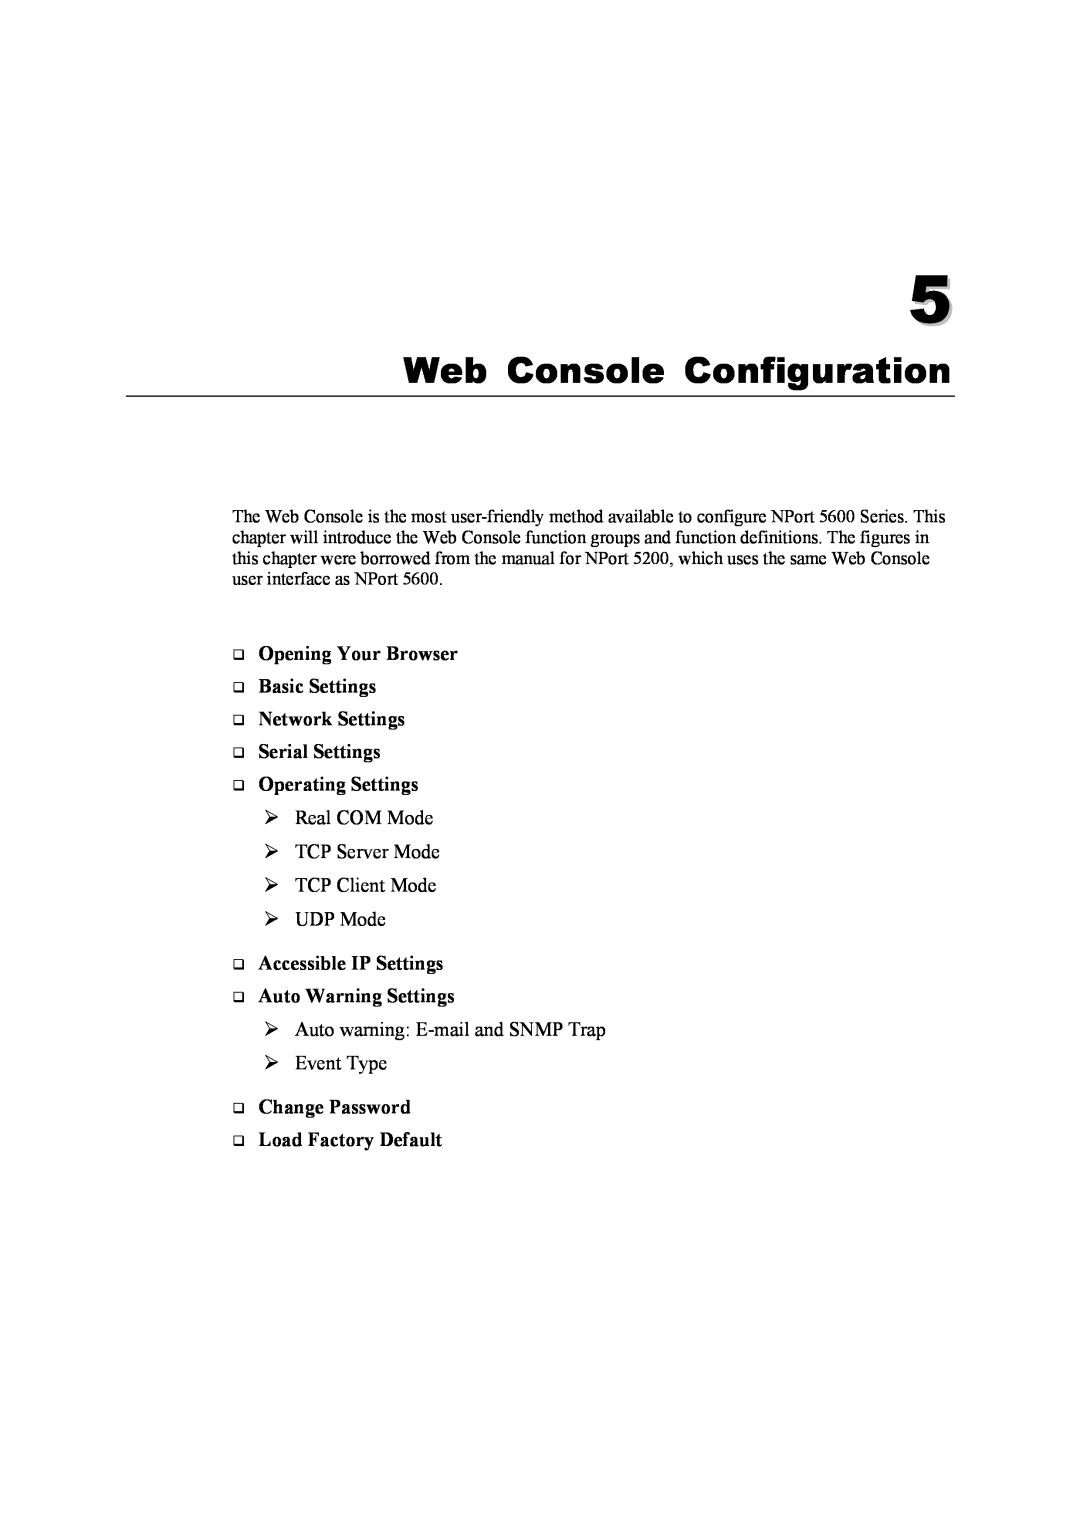 Moxa Technologies 5600 user manual Web Console Configuration, ‰ Opening Your Browser ‰ Basic Settings ‰ Network Settings 